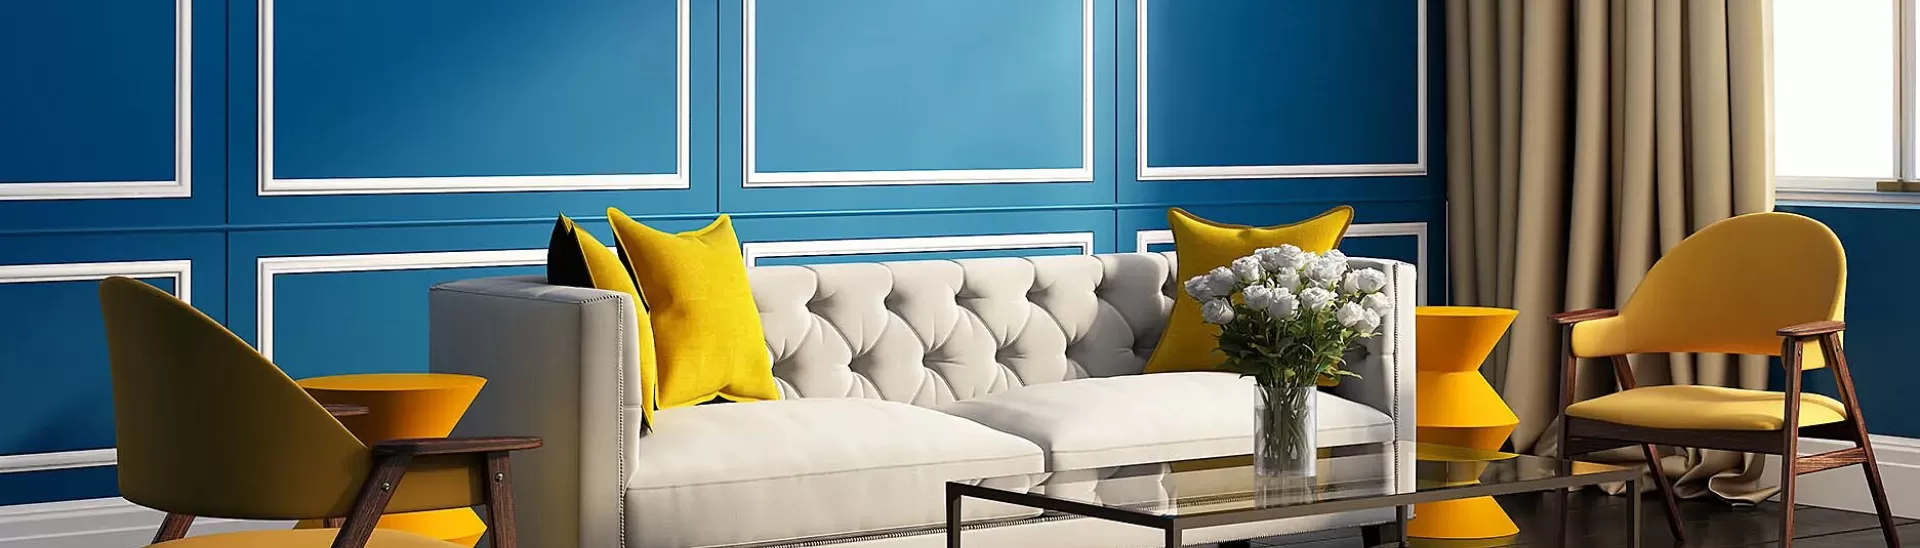 What Colours Match with Blue? 14 Colour Combinations with Blue for Your Home